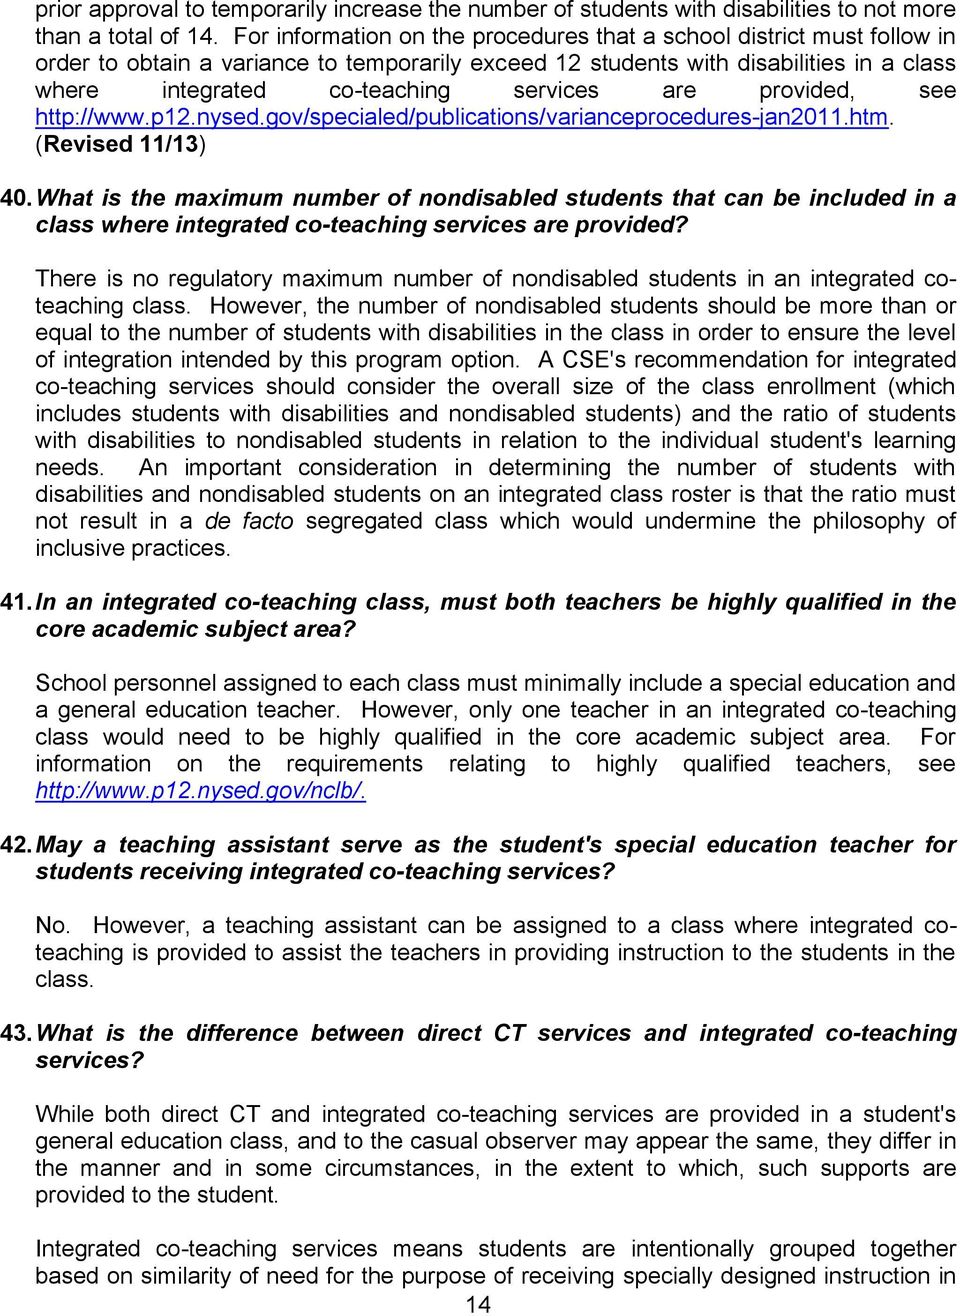 are provided, see http://www.p12.nysed.gov/specialed/publications/varianceprocedures-jan2011.htm. (Revised 11/13) 40.